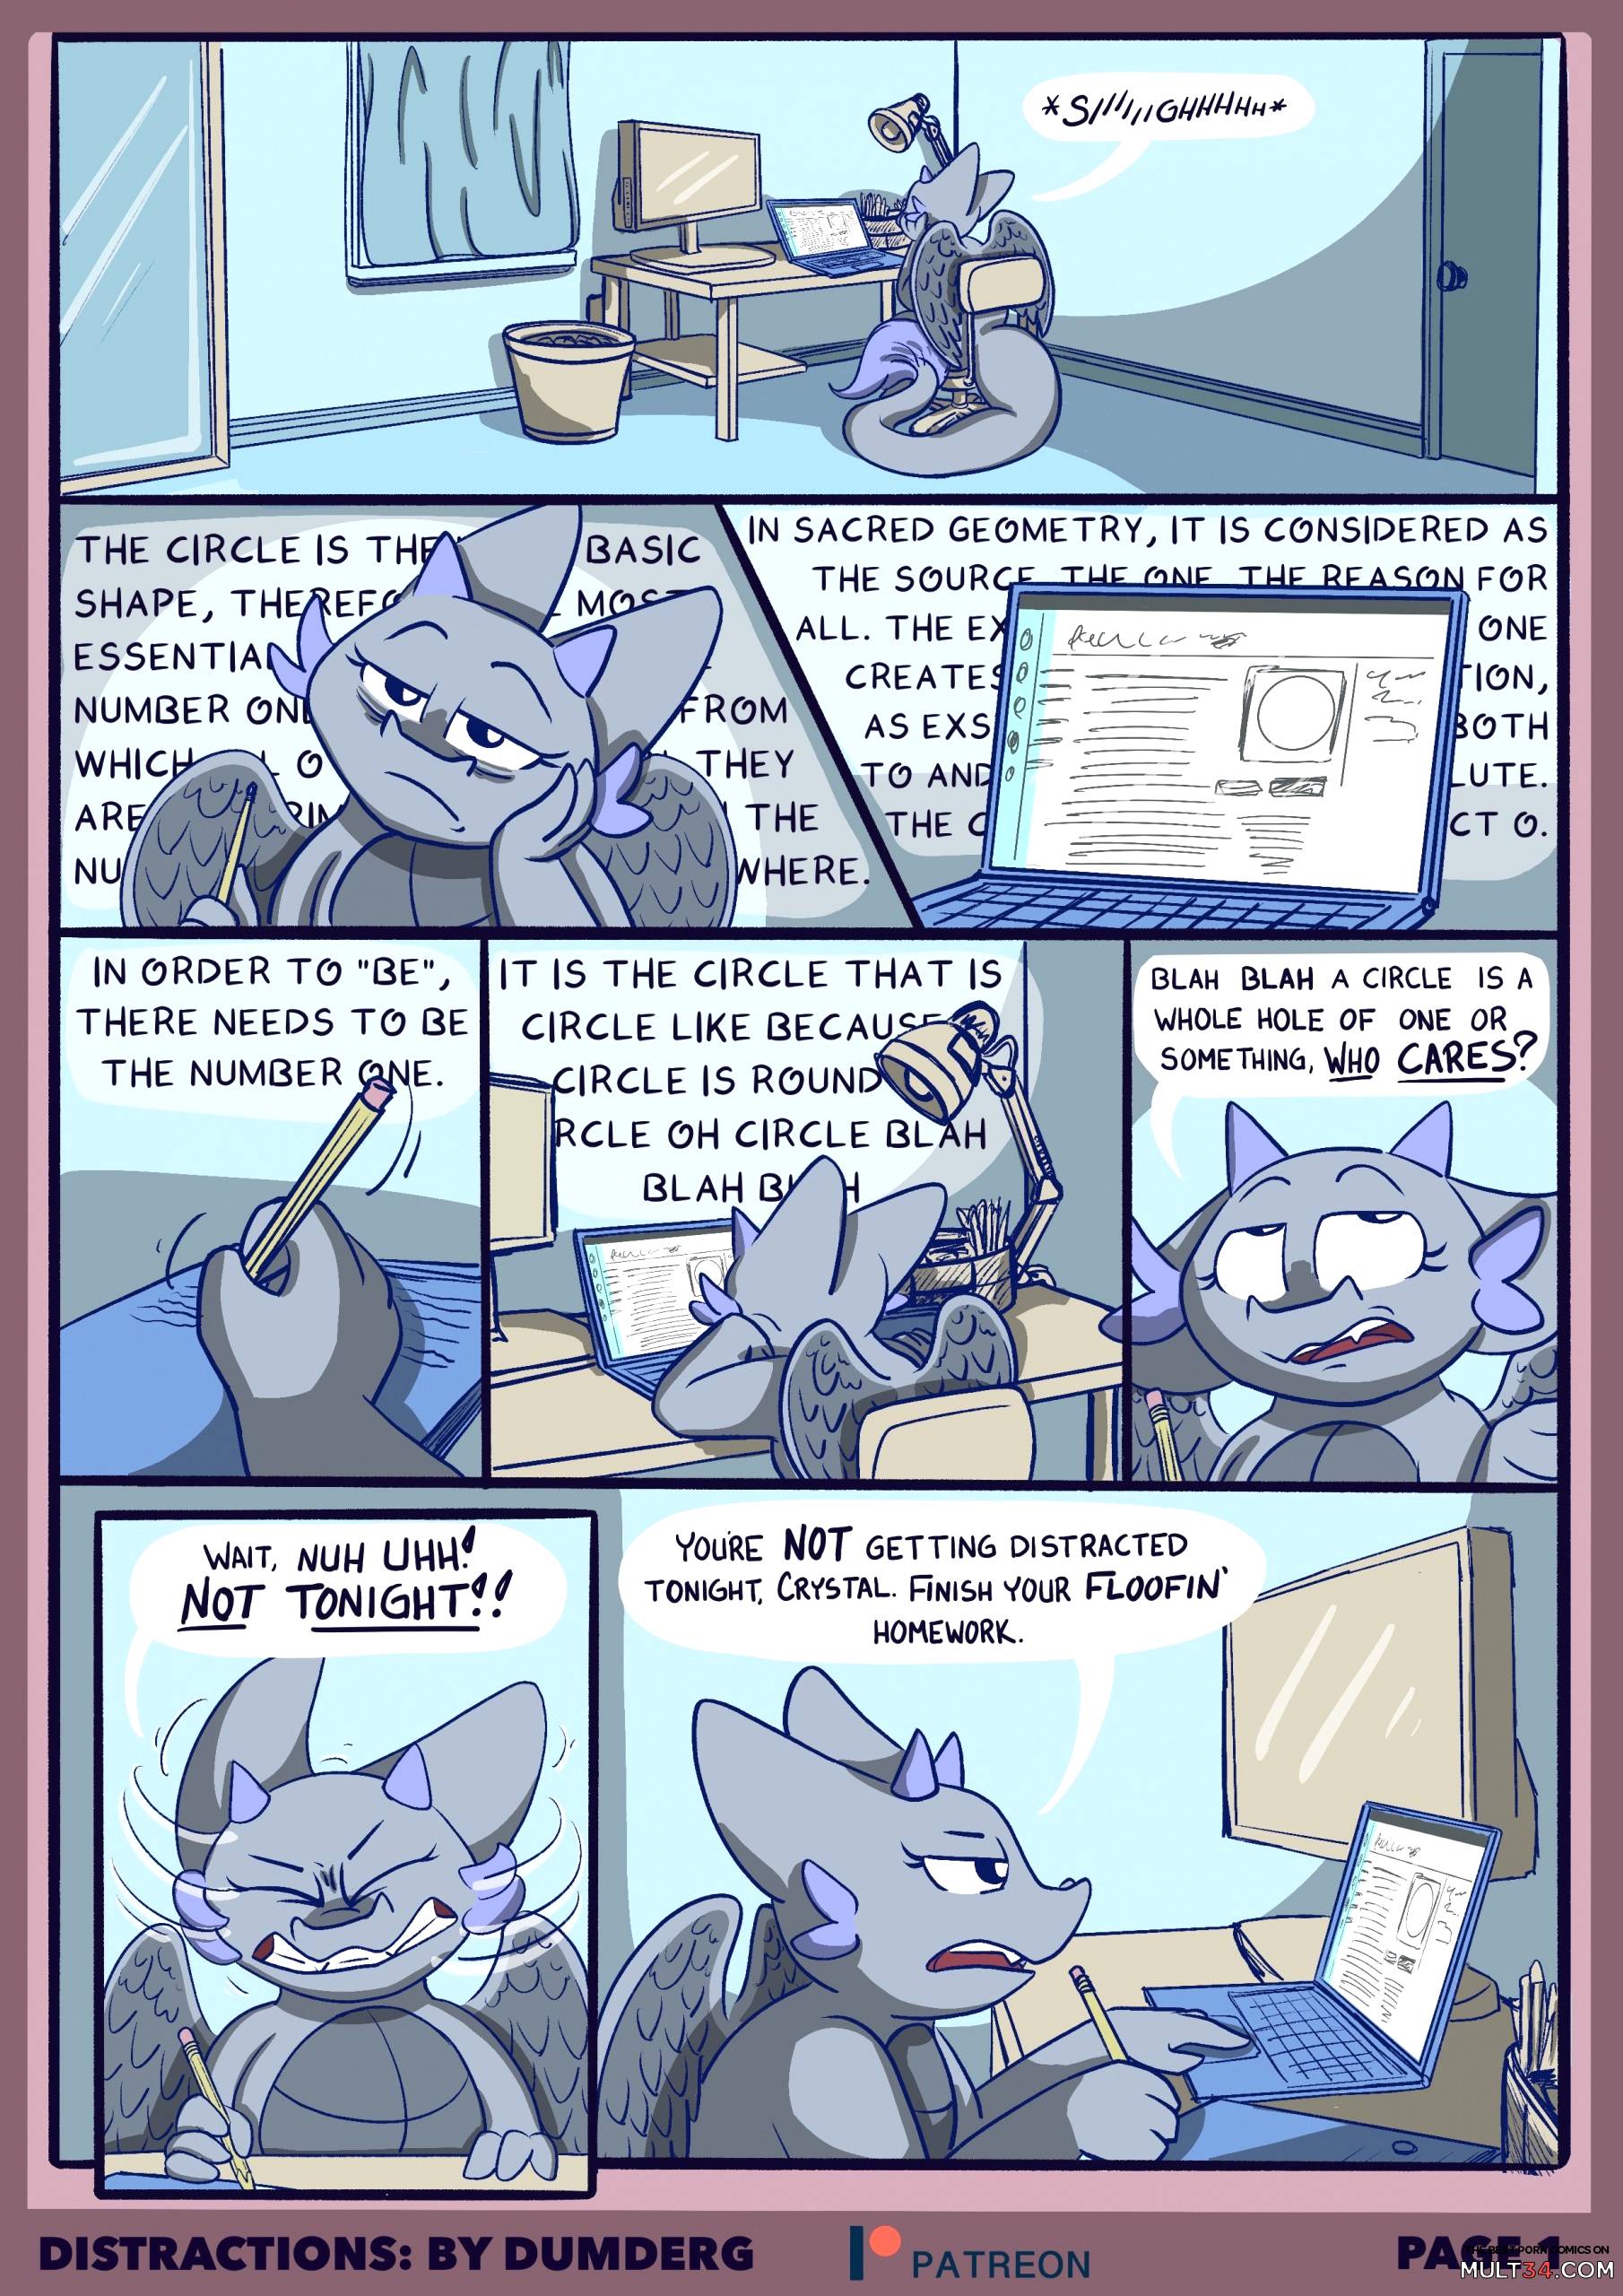 Distractions - DumDerg page 2